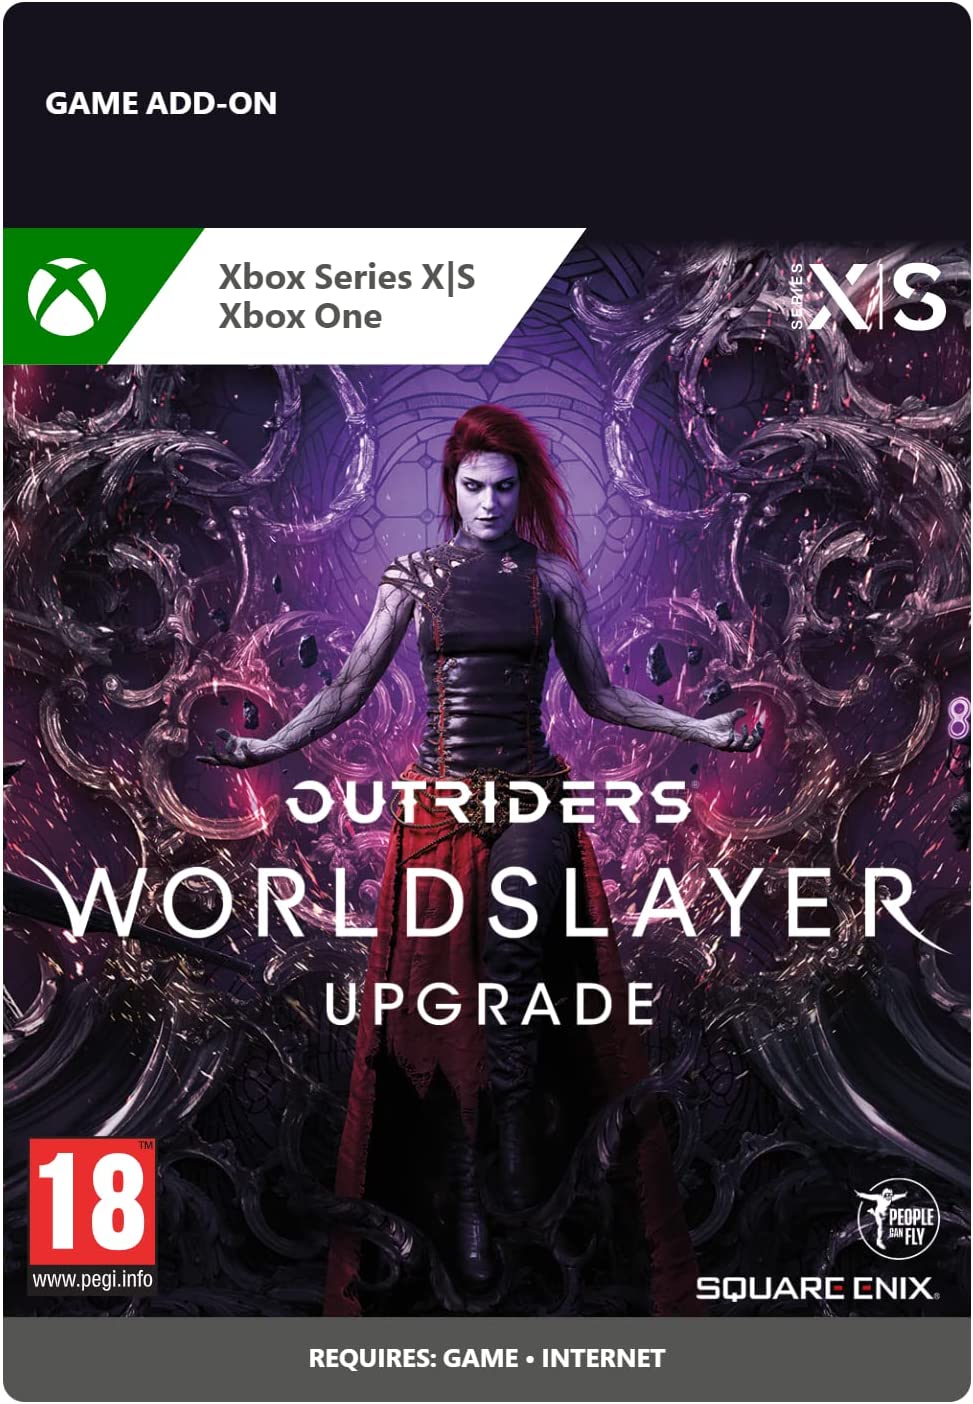 Outriders Worldslayer Upgrade (Xbox One/Series X|S Download Code)